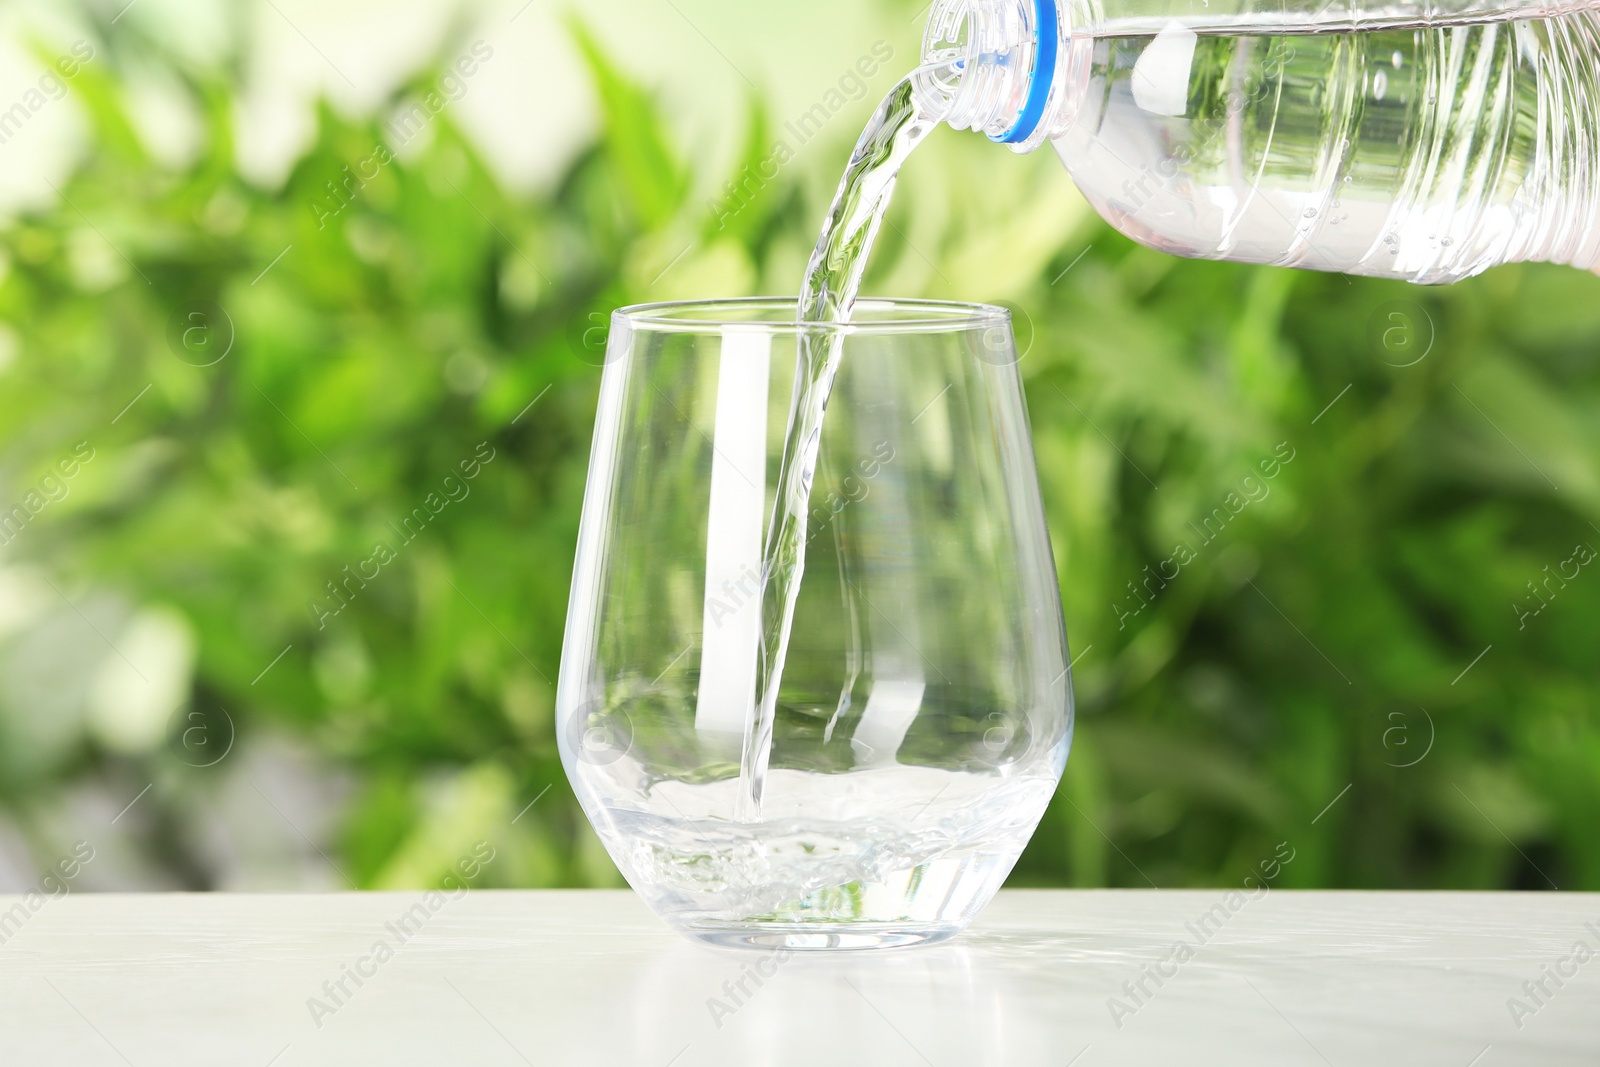 Photo of Pouring water from bottle into glass on table against blurred background